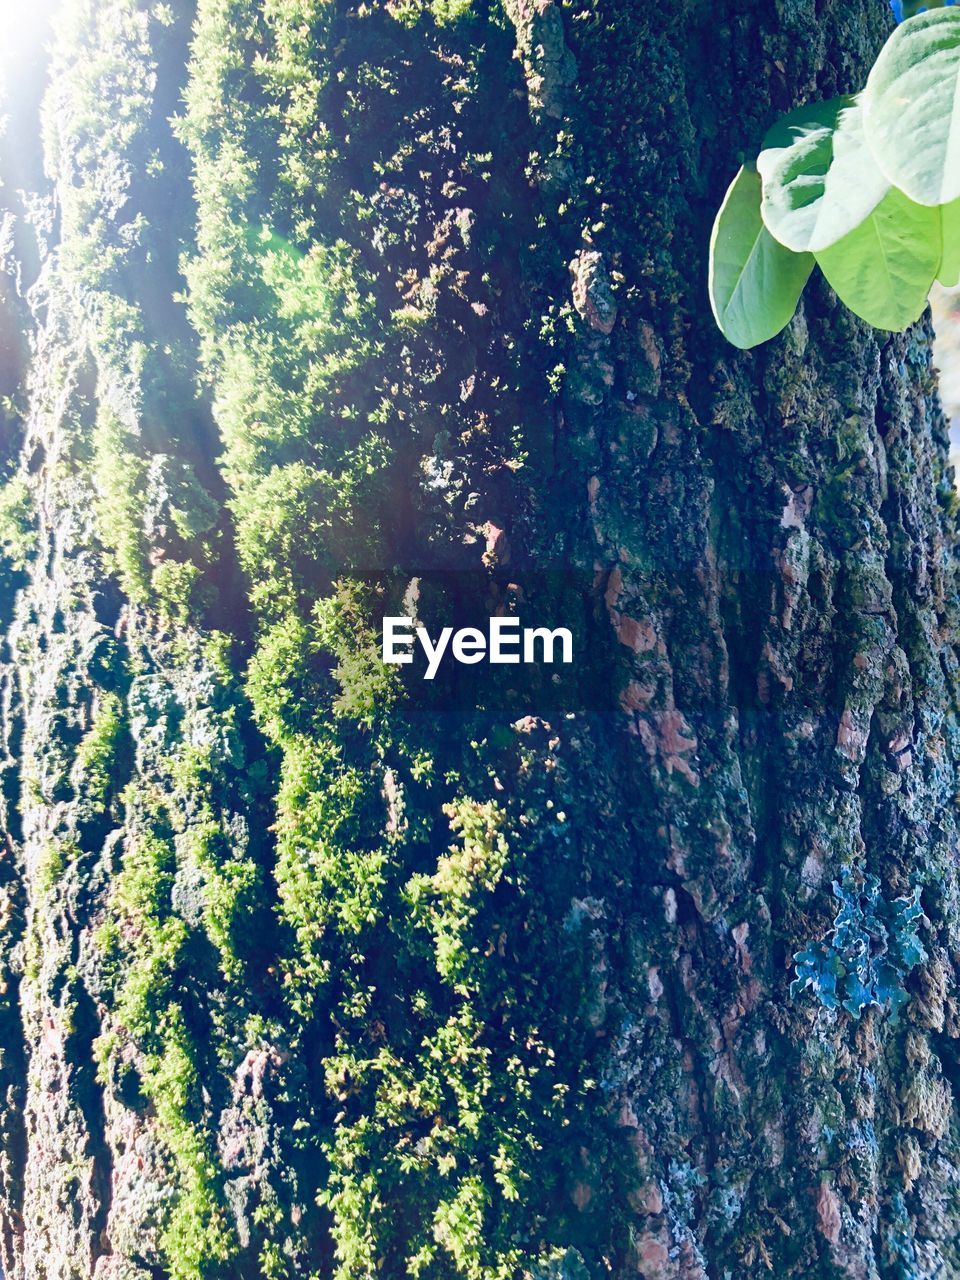 CLOSE-UP OF IVY ON TREE TRUNK IN FOREST